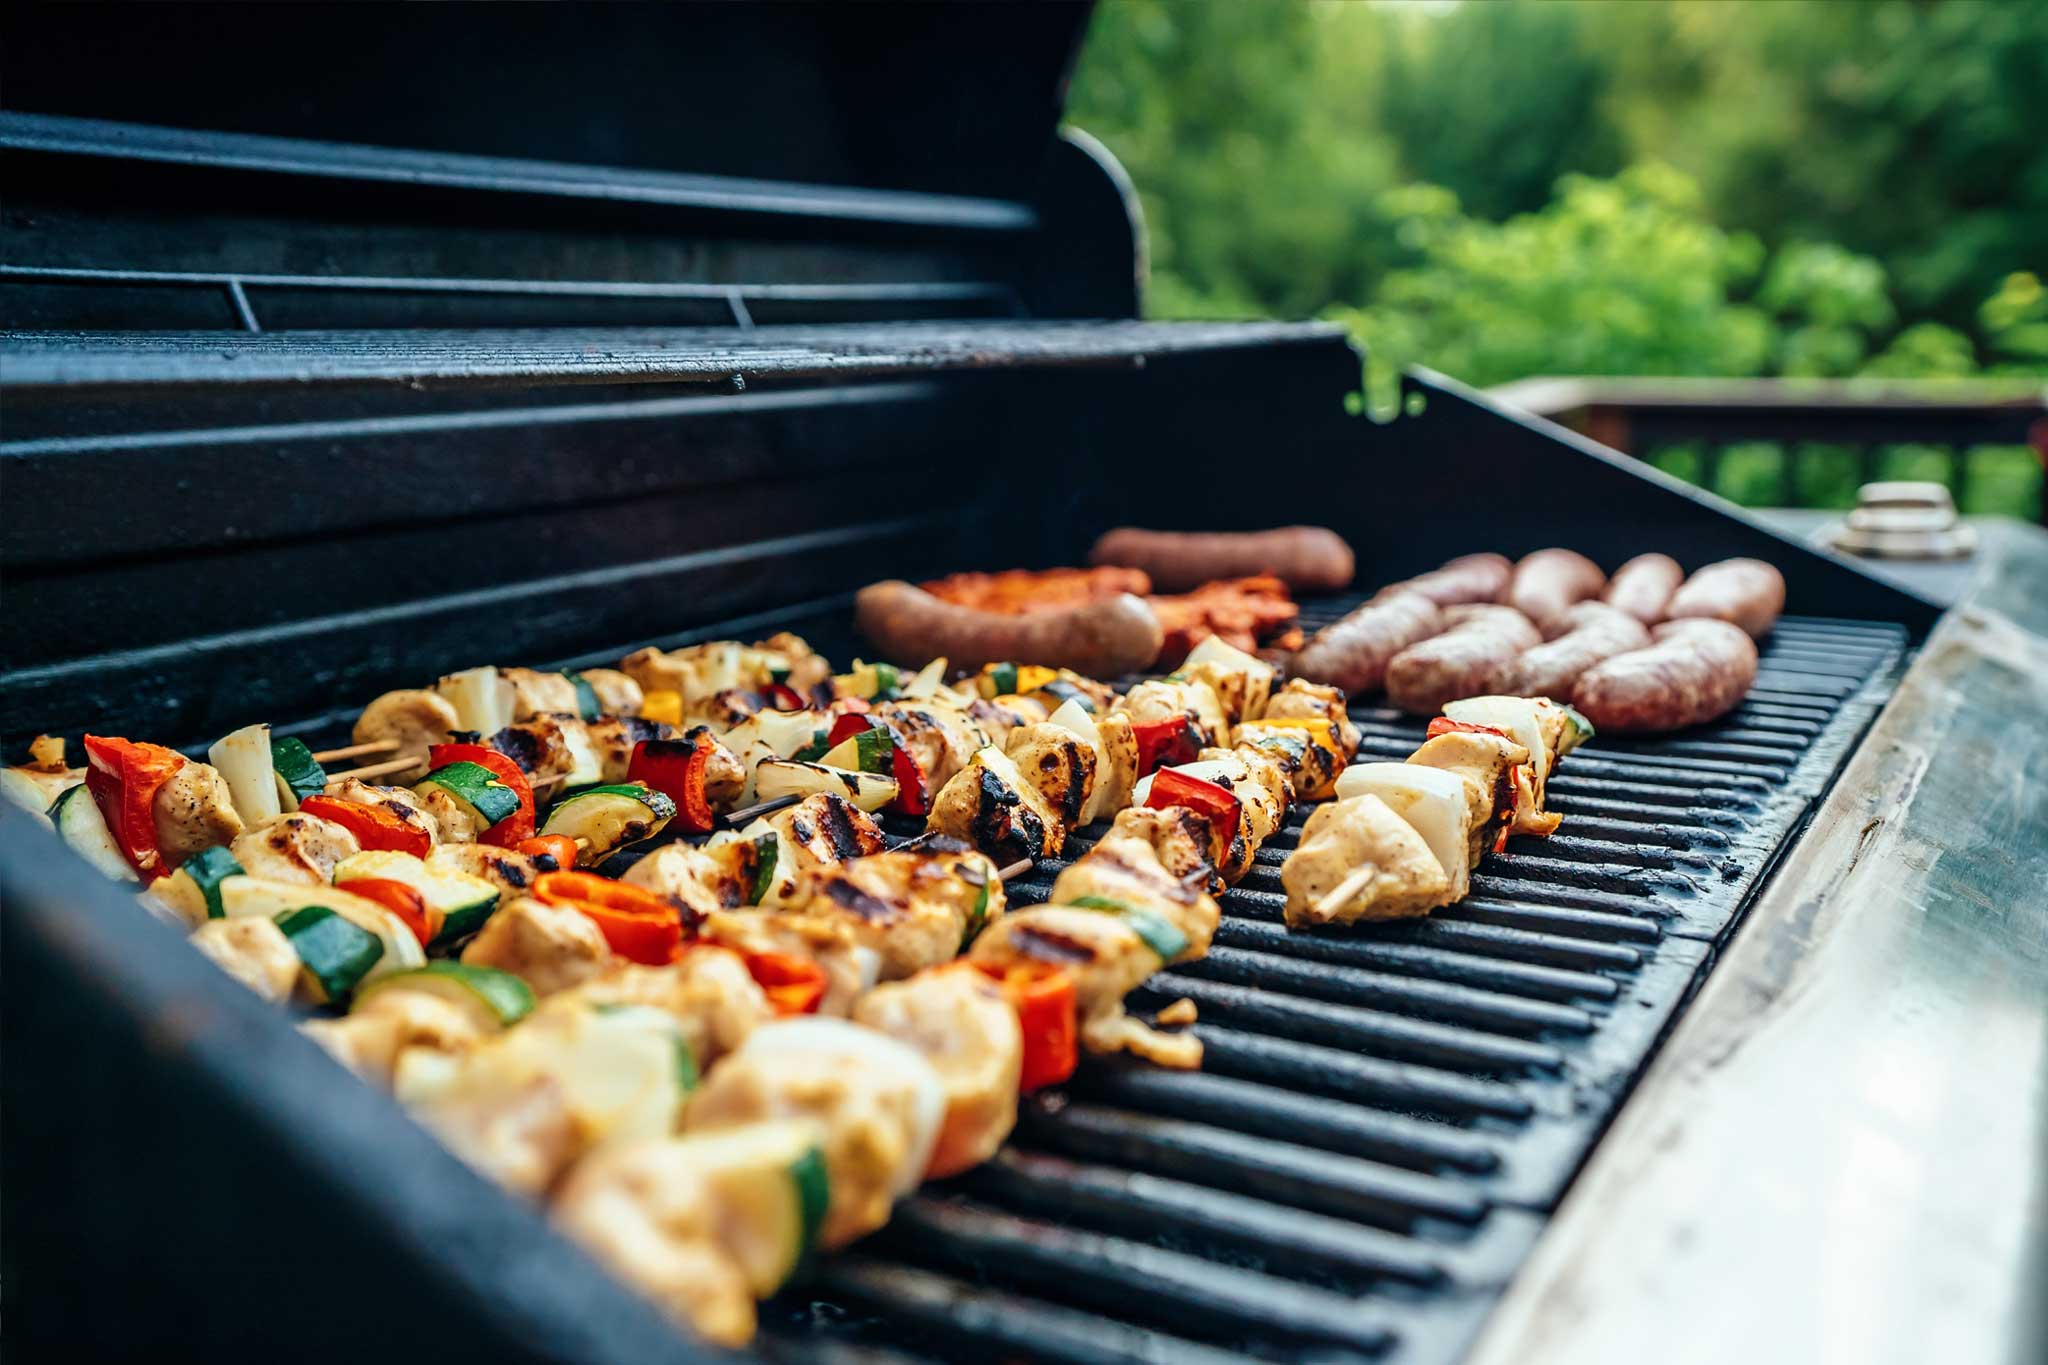 Your first evening meal will be included in your Hen Party package. We have a BBQ to use too!